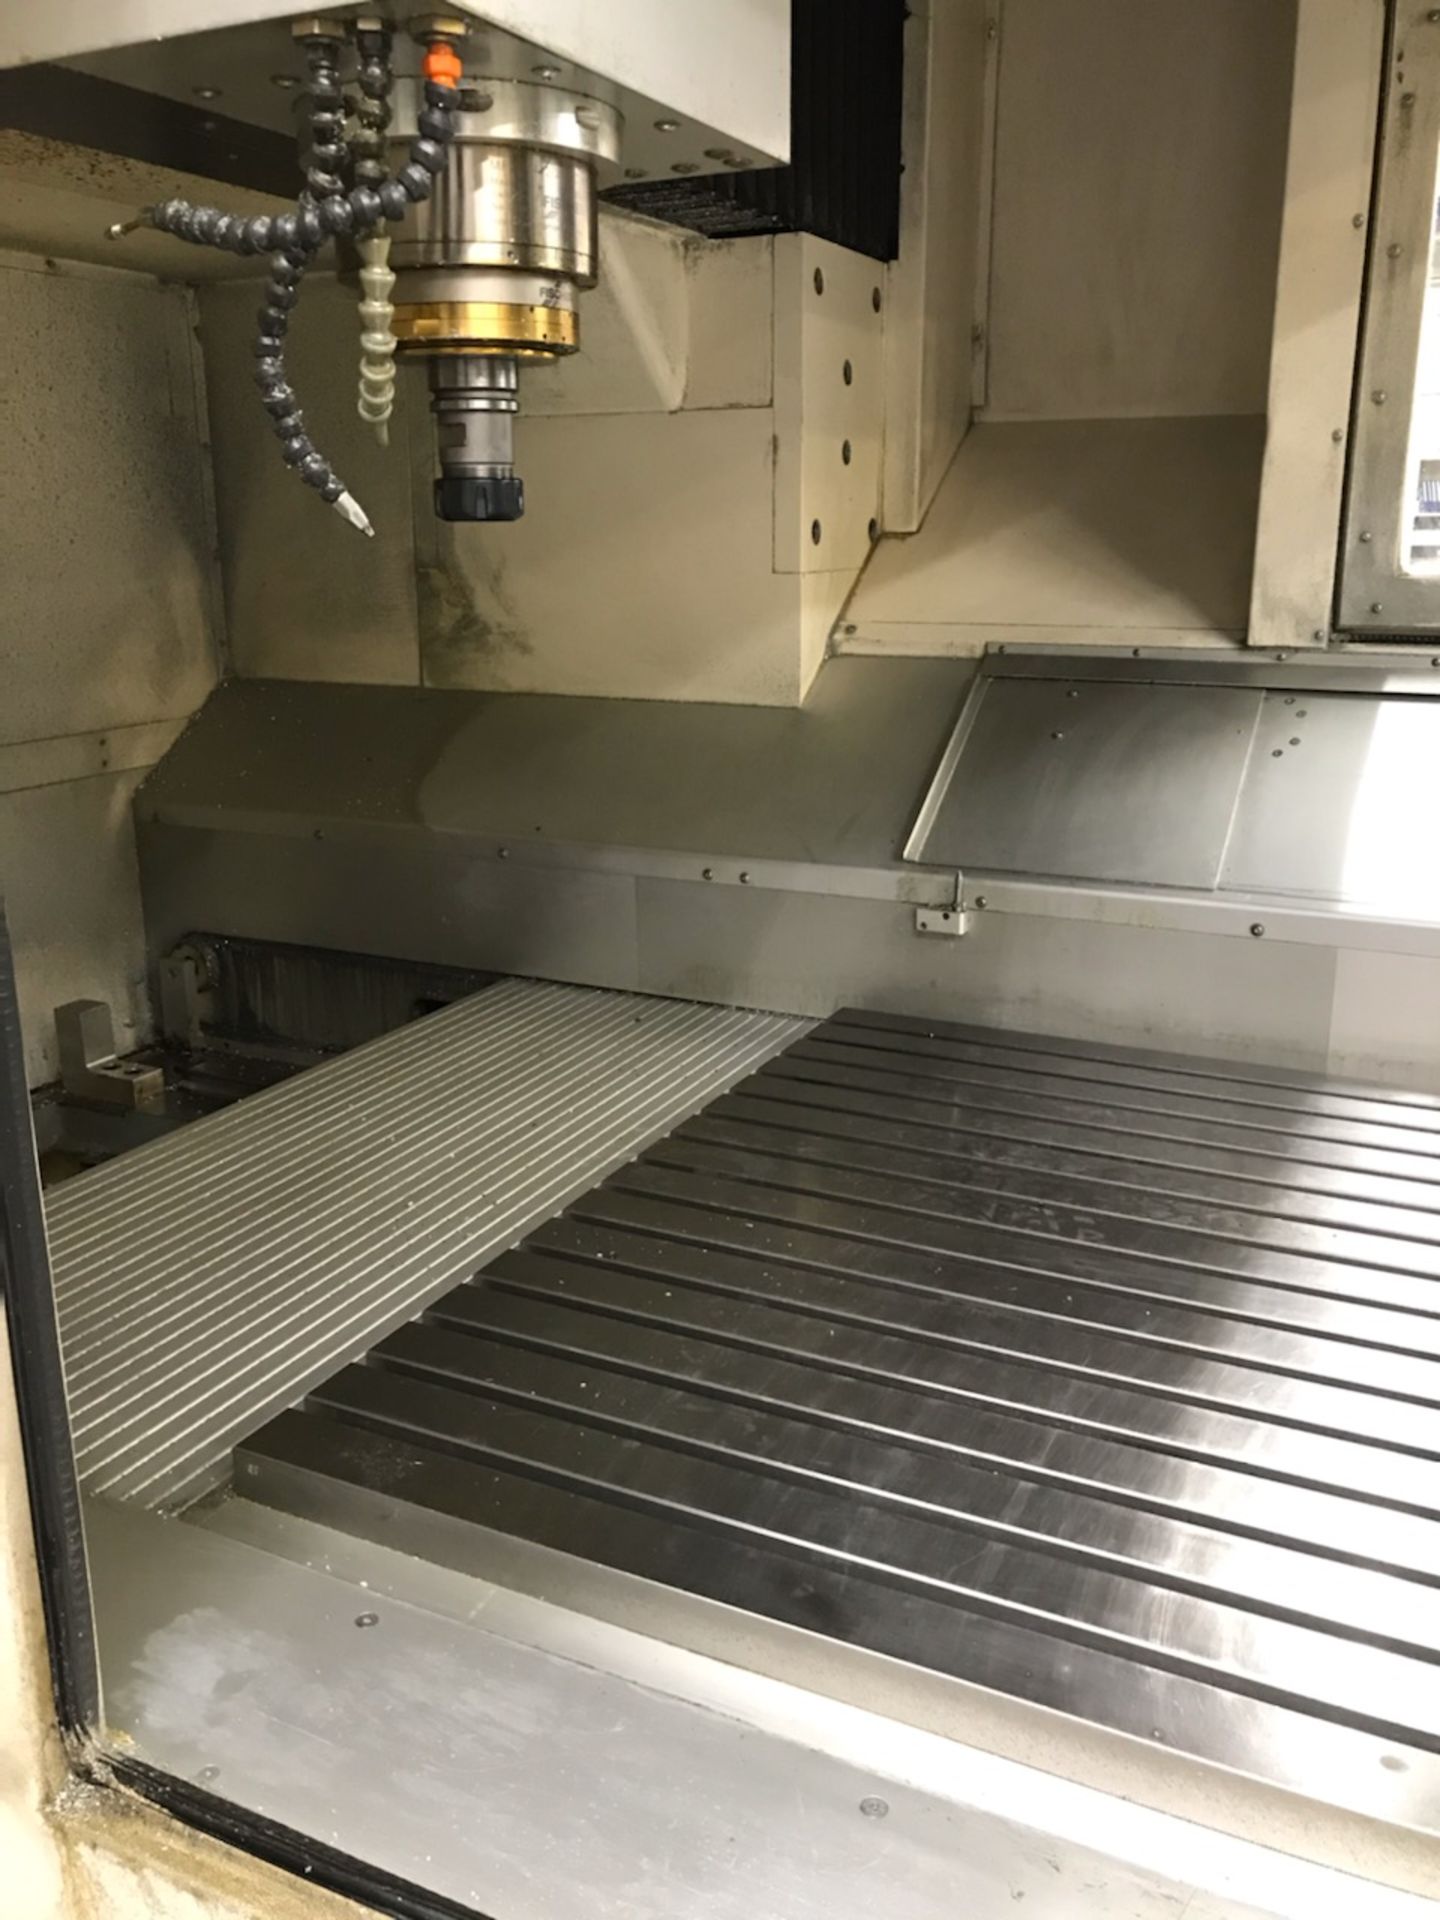 Roders RFM 1000 CNC 3-Axis Vertical Machining Center - Image 3 of 11